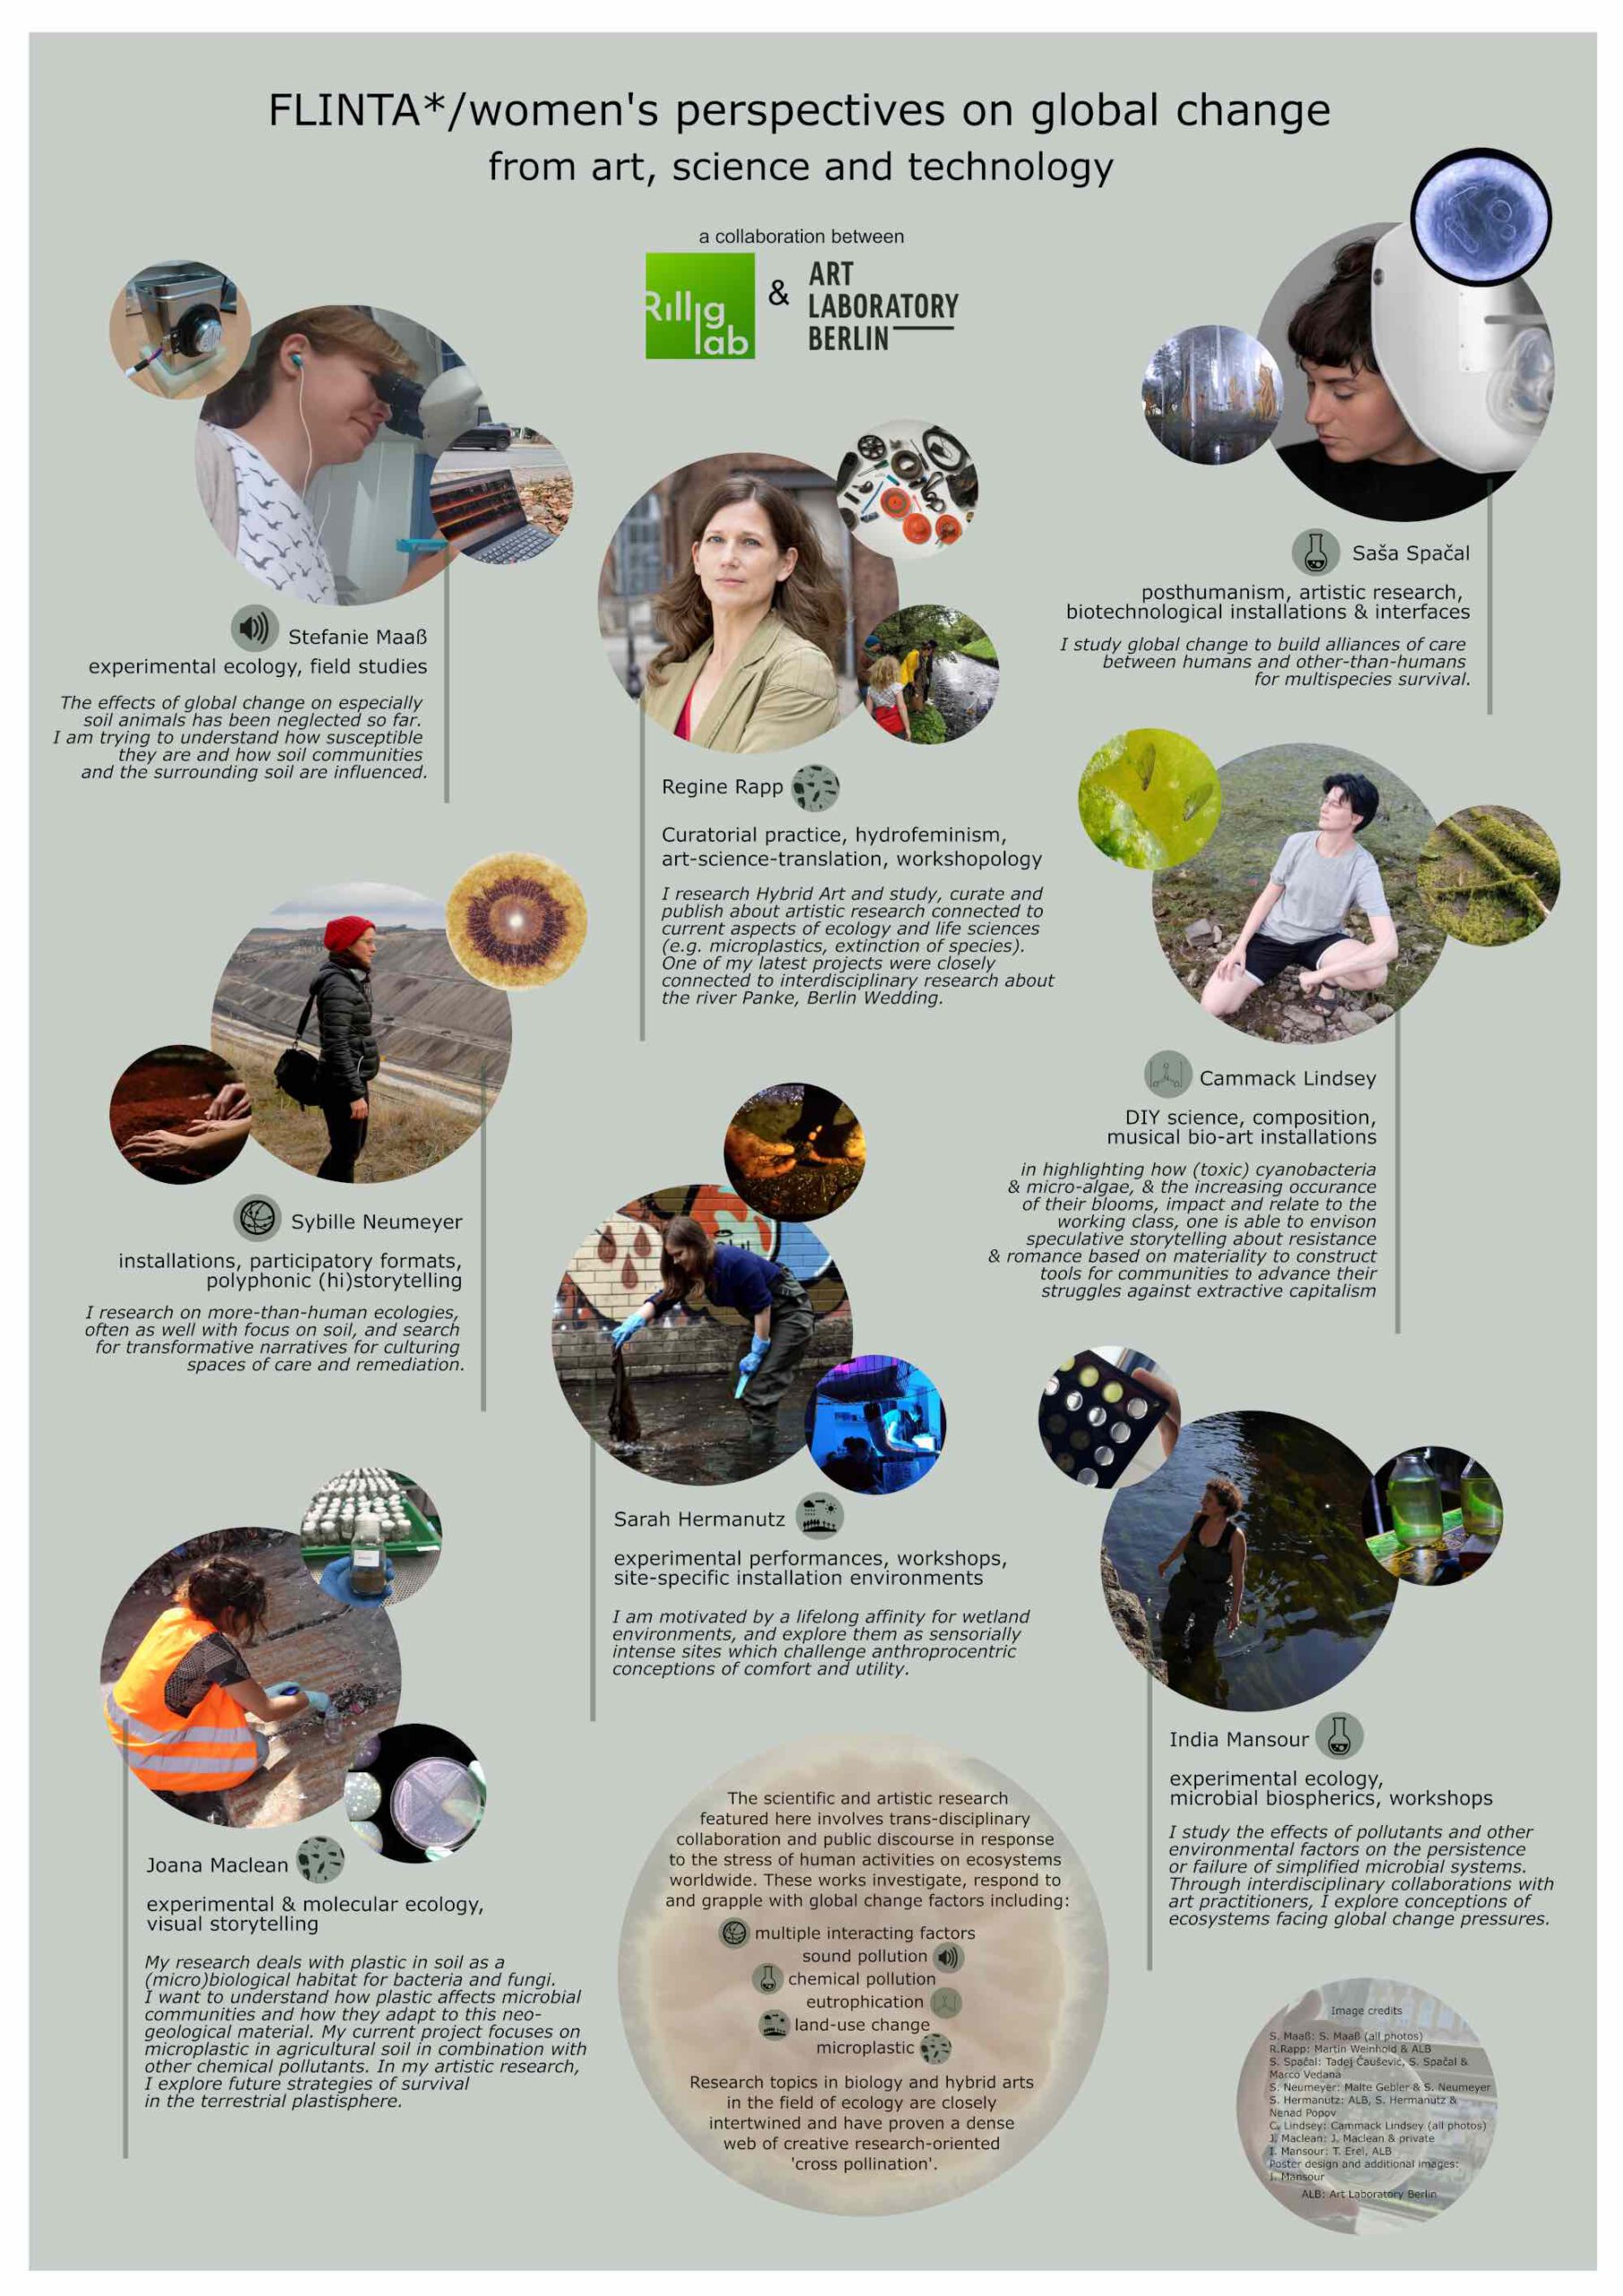 Poster FLINTA*/ women's perspectives on global change from art, science and technology a collaboration between Rillig Lab and Art Laboratory Berlin with small round photos and text